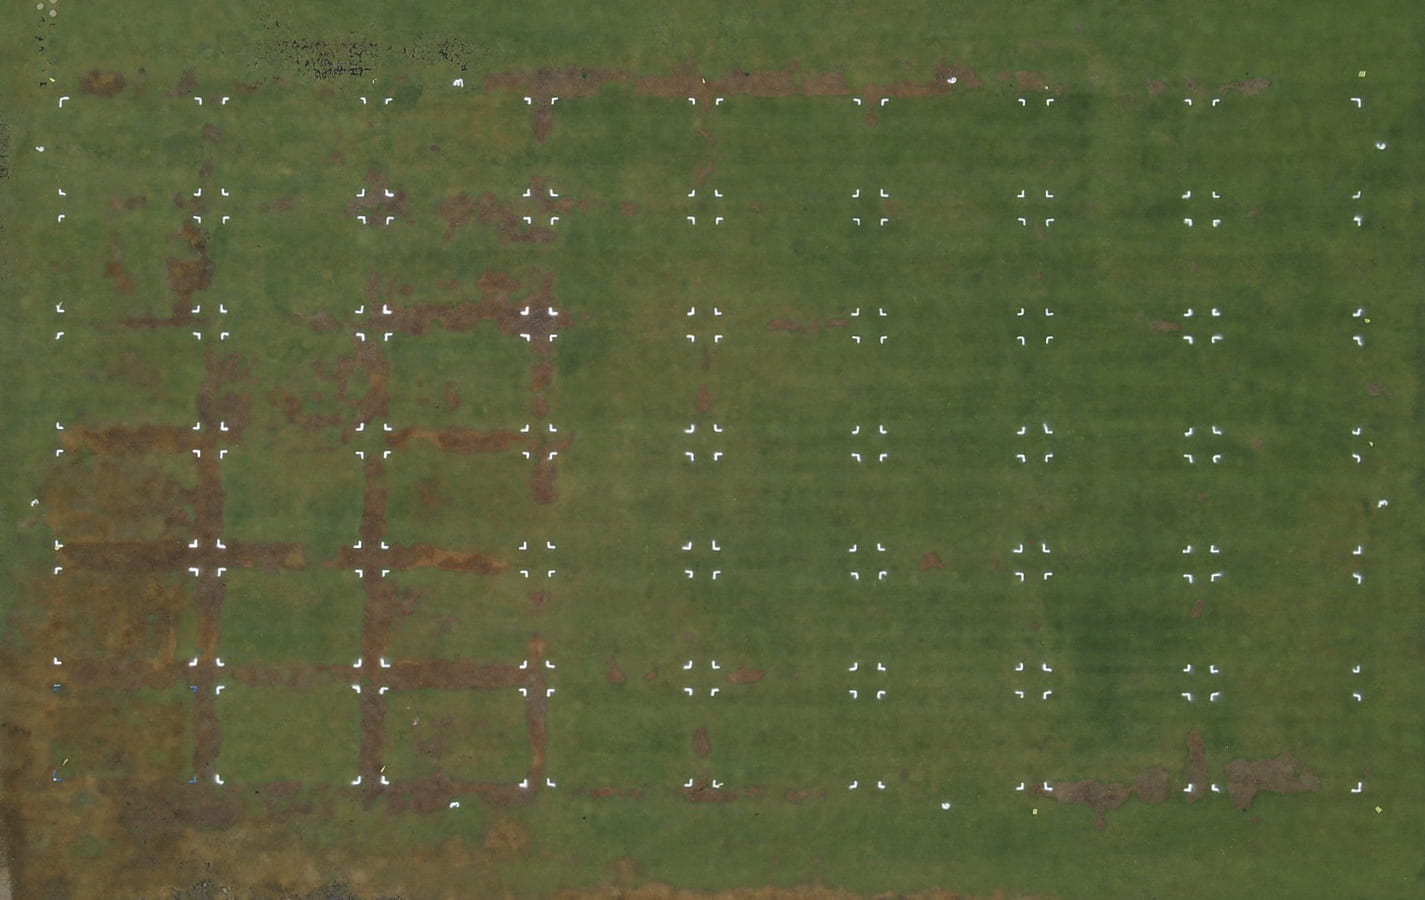 Aerial photo of turfgrass research trials marked with little white corner markers